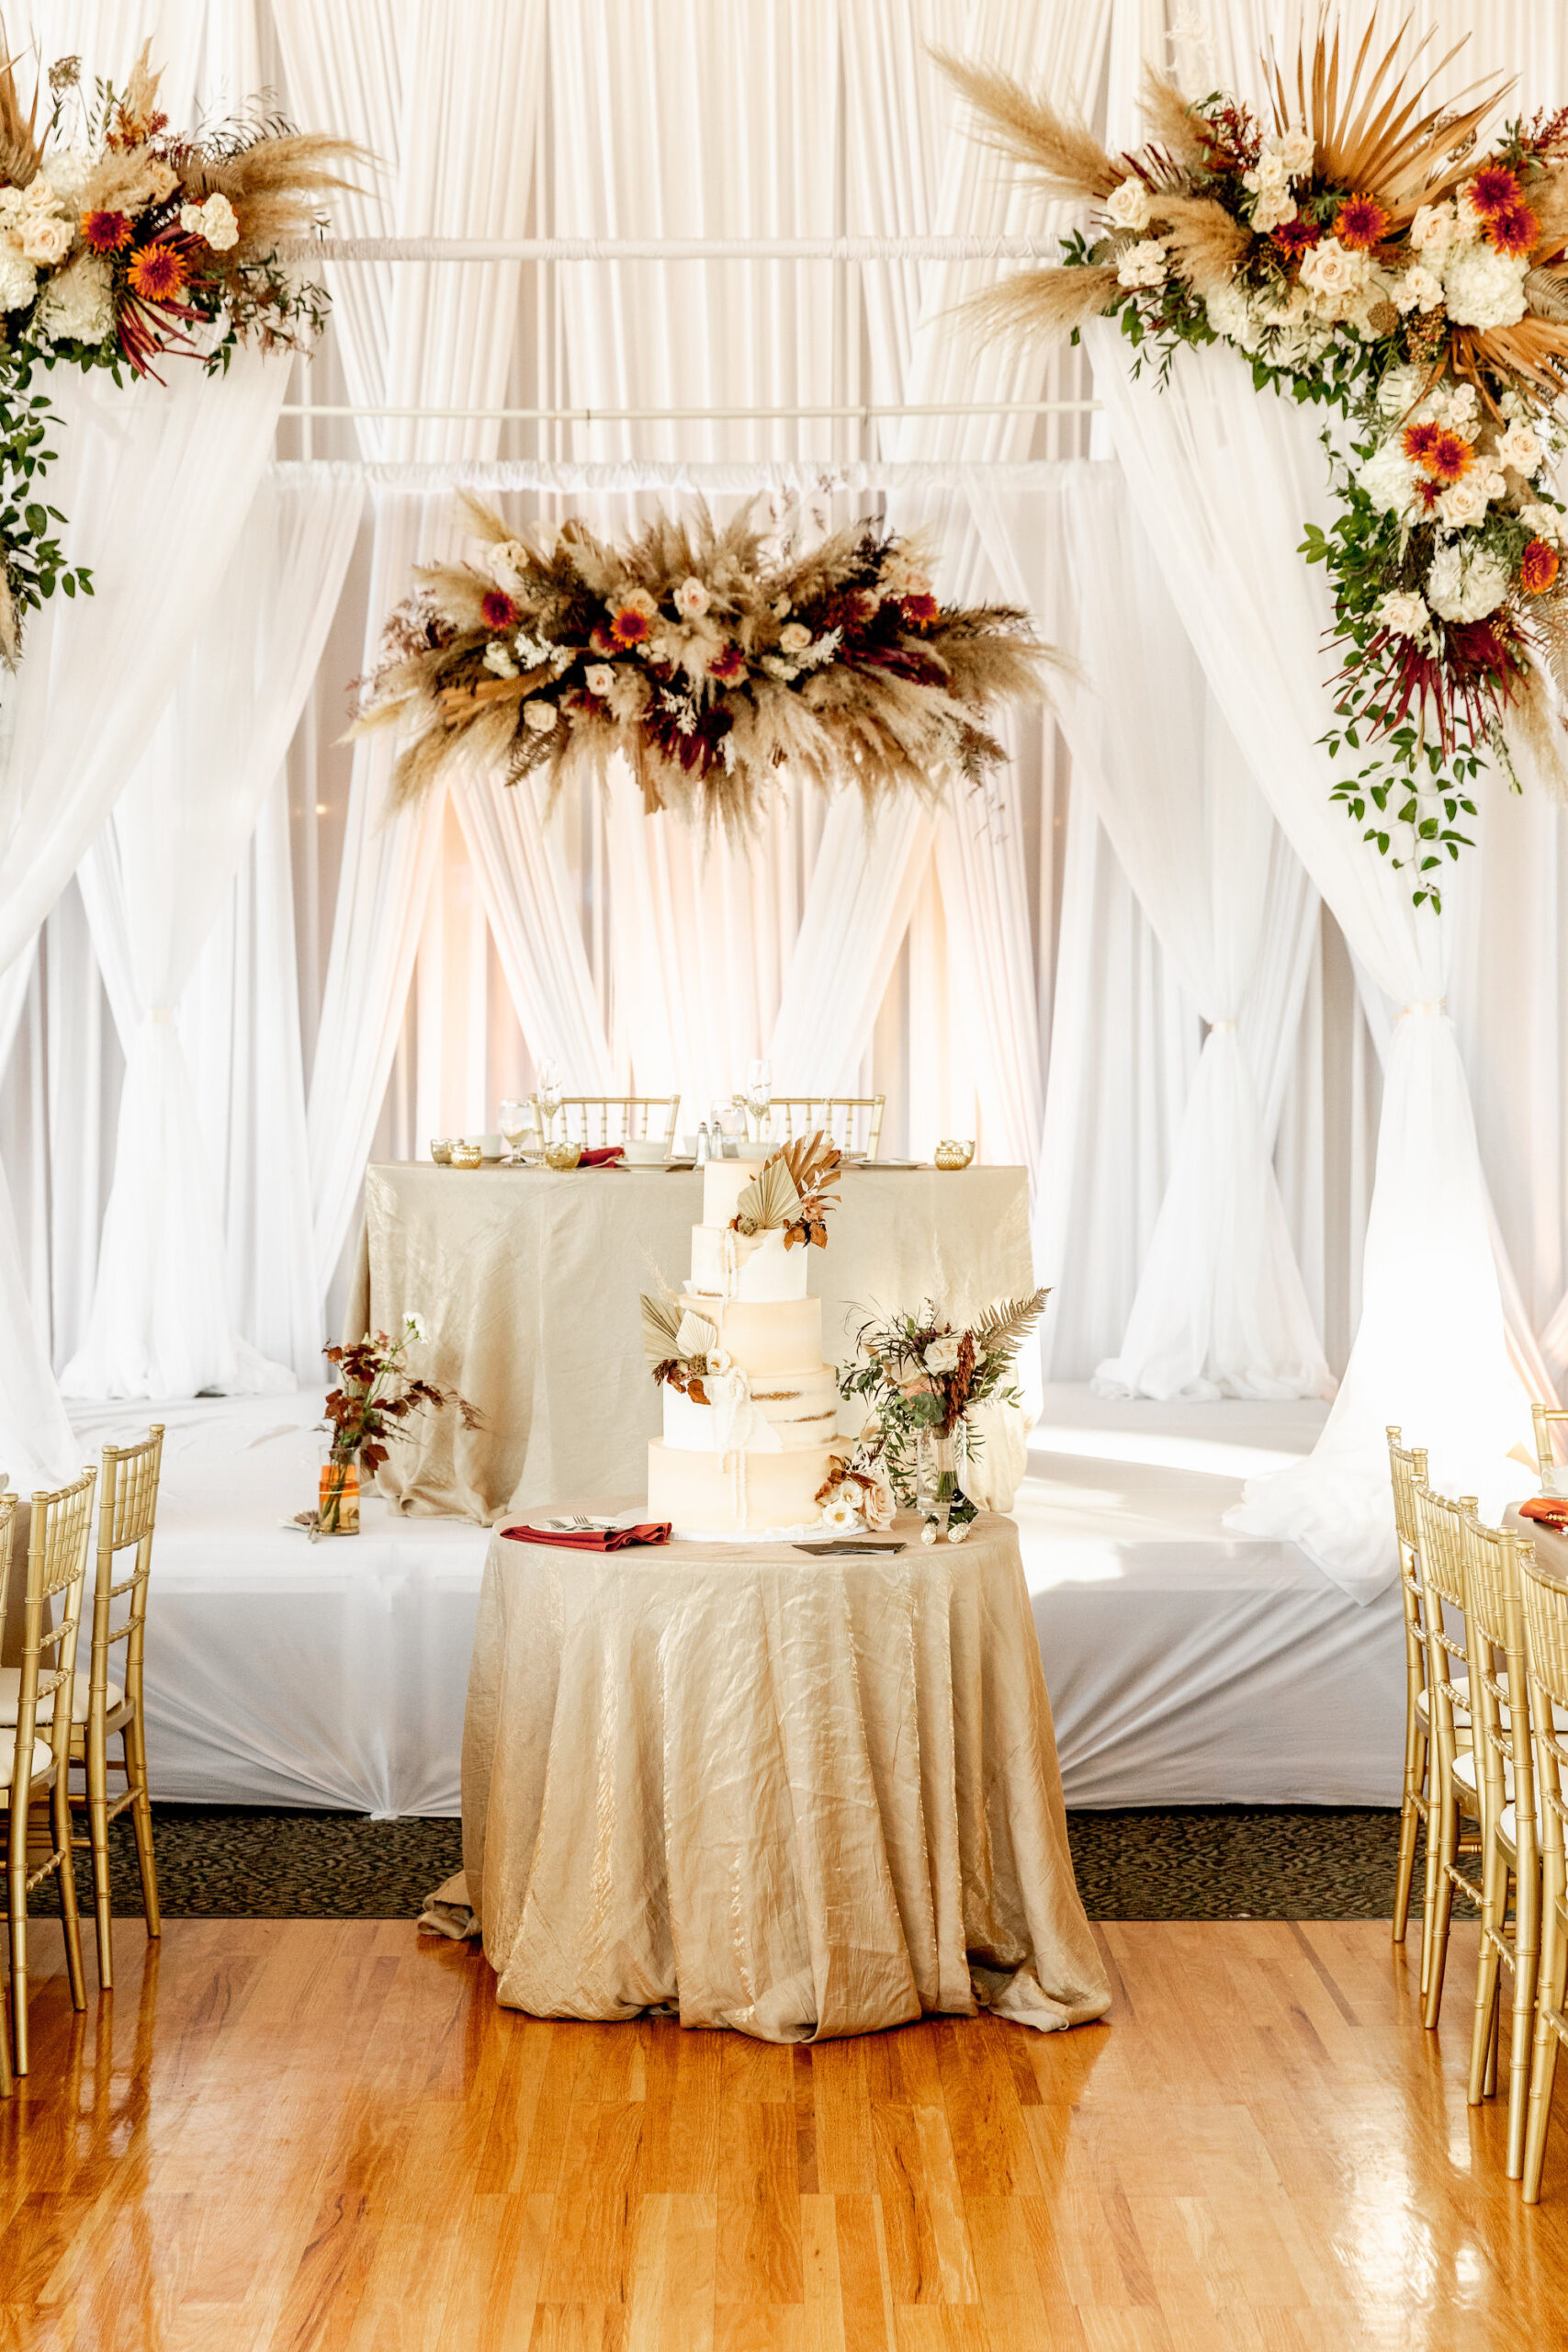 Fall Boho Wedding Ceremony Decor, Cake Table with Champagne Linen and Five Tier White Wedding Cake | Tampa Bay Wedding Rentals Gabro Event ServicesArch with Lush Dried Palm Leaves, Pampas Grass, Burnt Orange, White and Ivory Flowers, Greenery Floral Arrangements